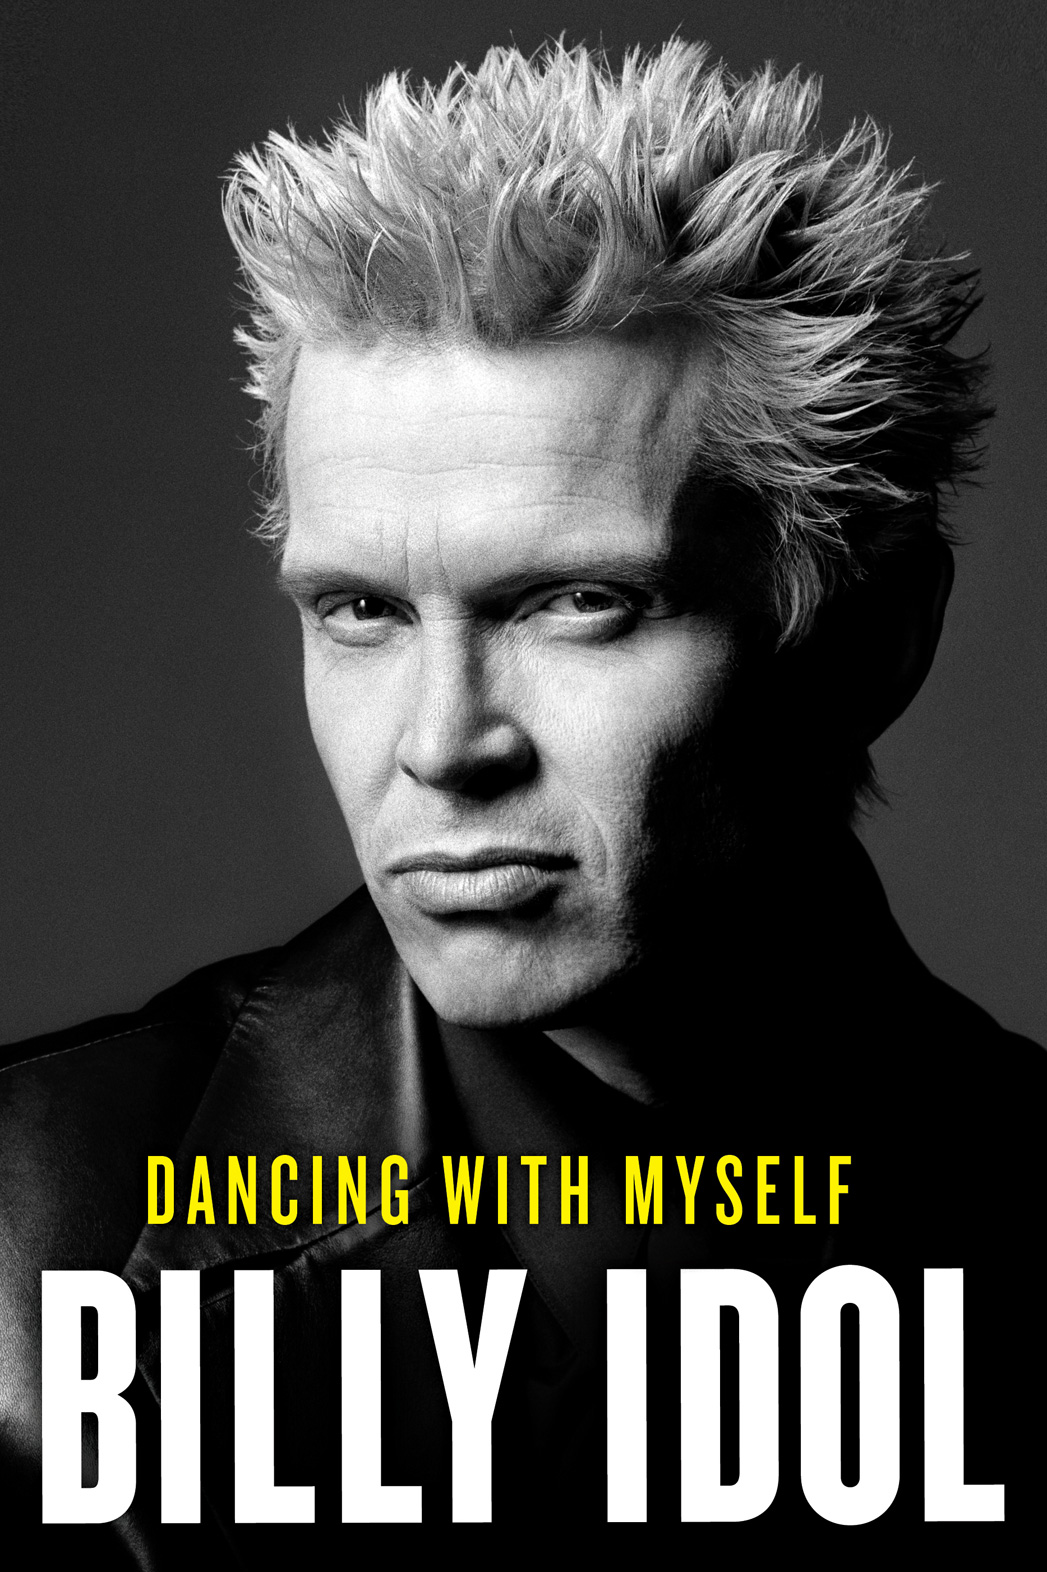 Billy Idol – Dancing With Myself is the Long Awaited Autobiography!